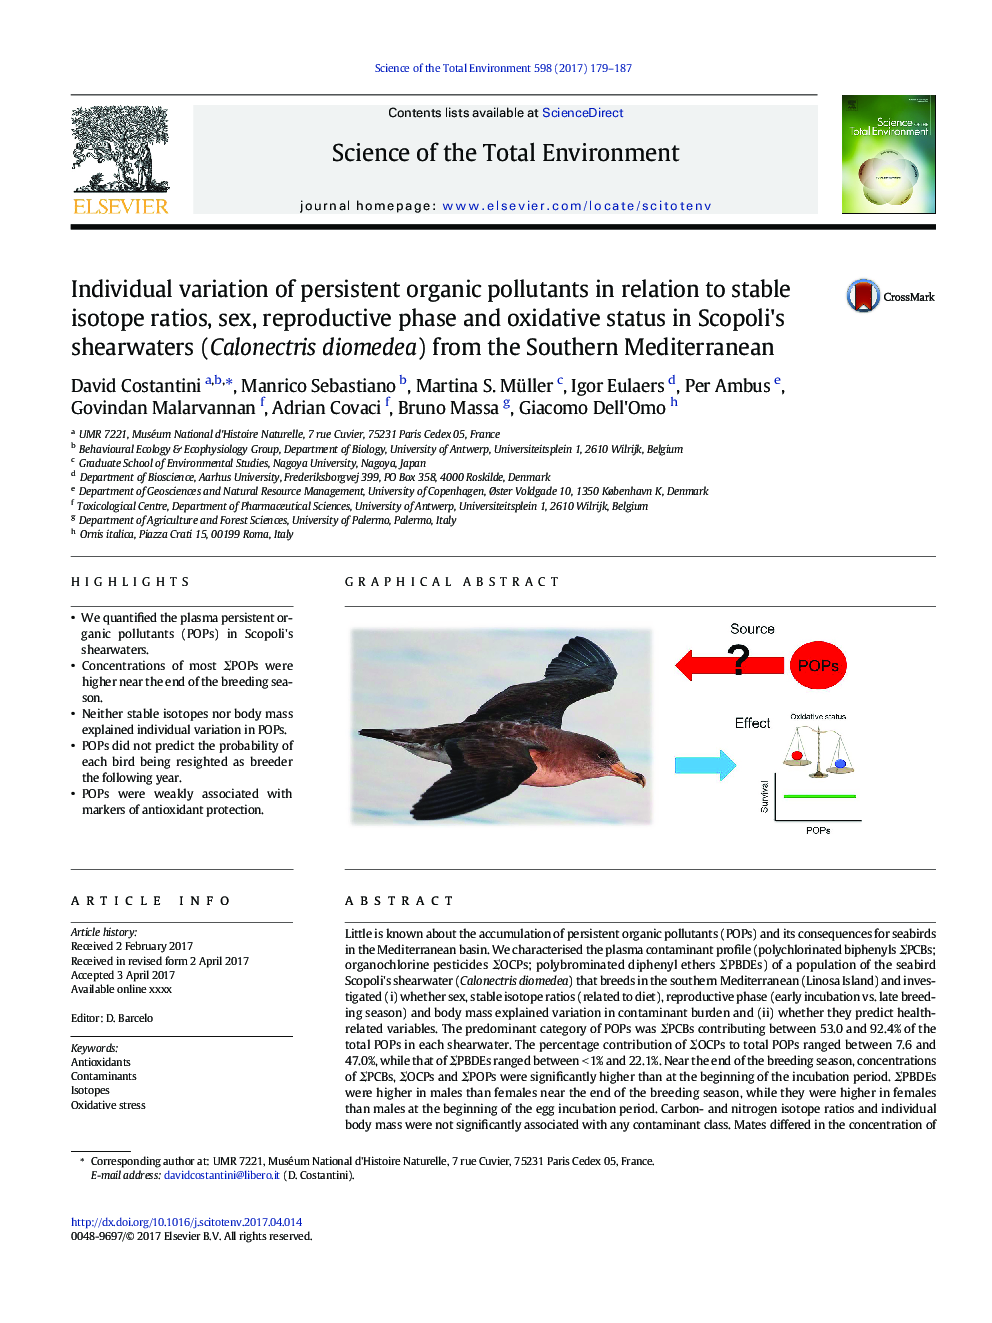 Individual variation of persistent organic pollutants in relation to stable isotope ratios, sex, reproductive phase and oxidative status in Scopoli's shearwaters (Calonectris diomedea) from the Southern Mediterranean